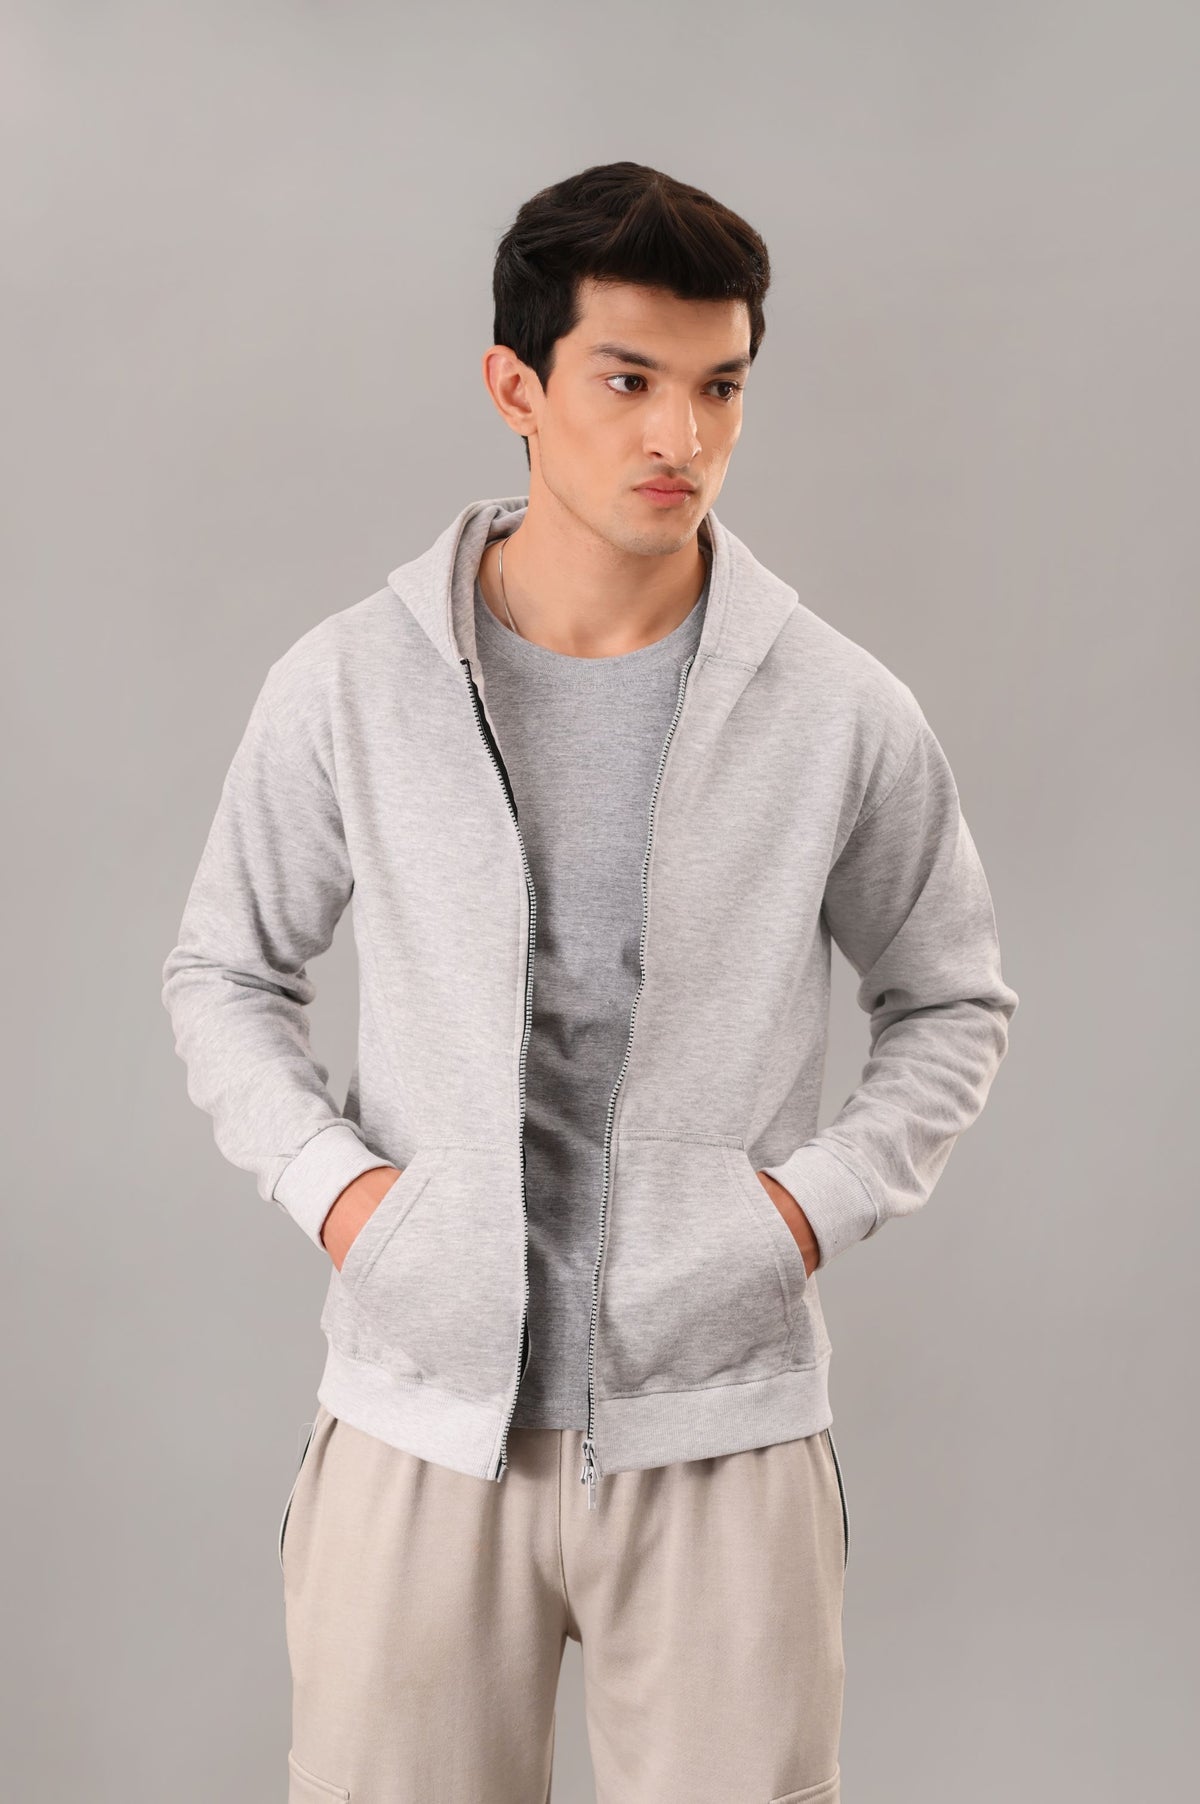 Gray Zipper Hoodie (2XL - 3XL) - M - Checkmate Atelier - Official Online Store